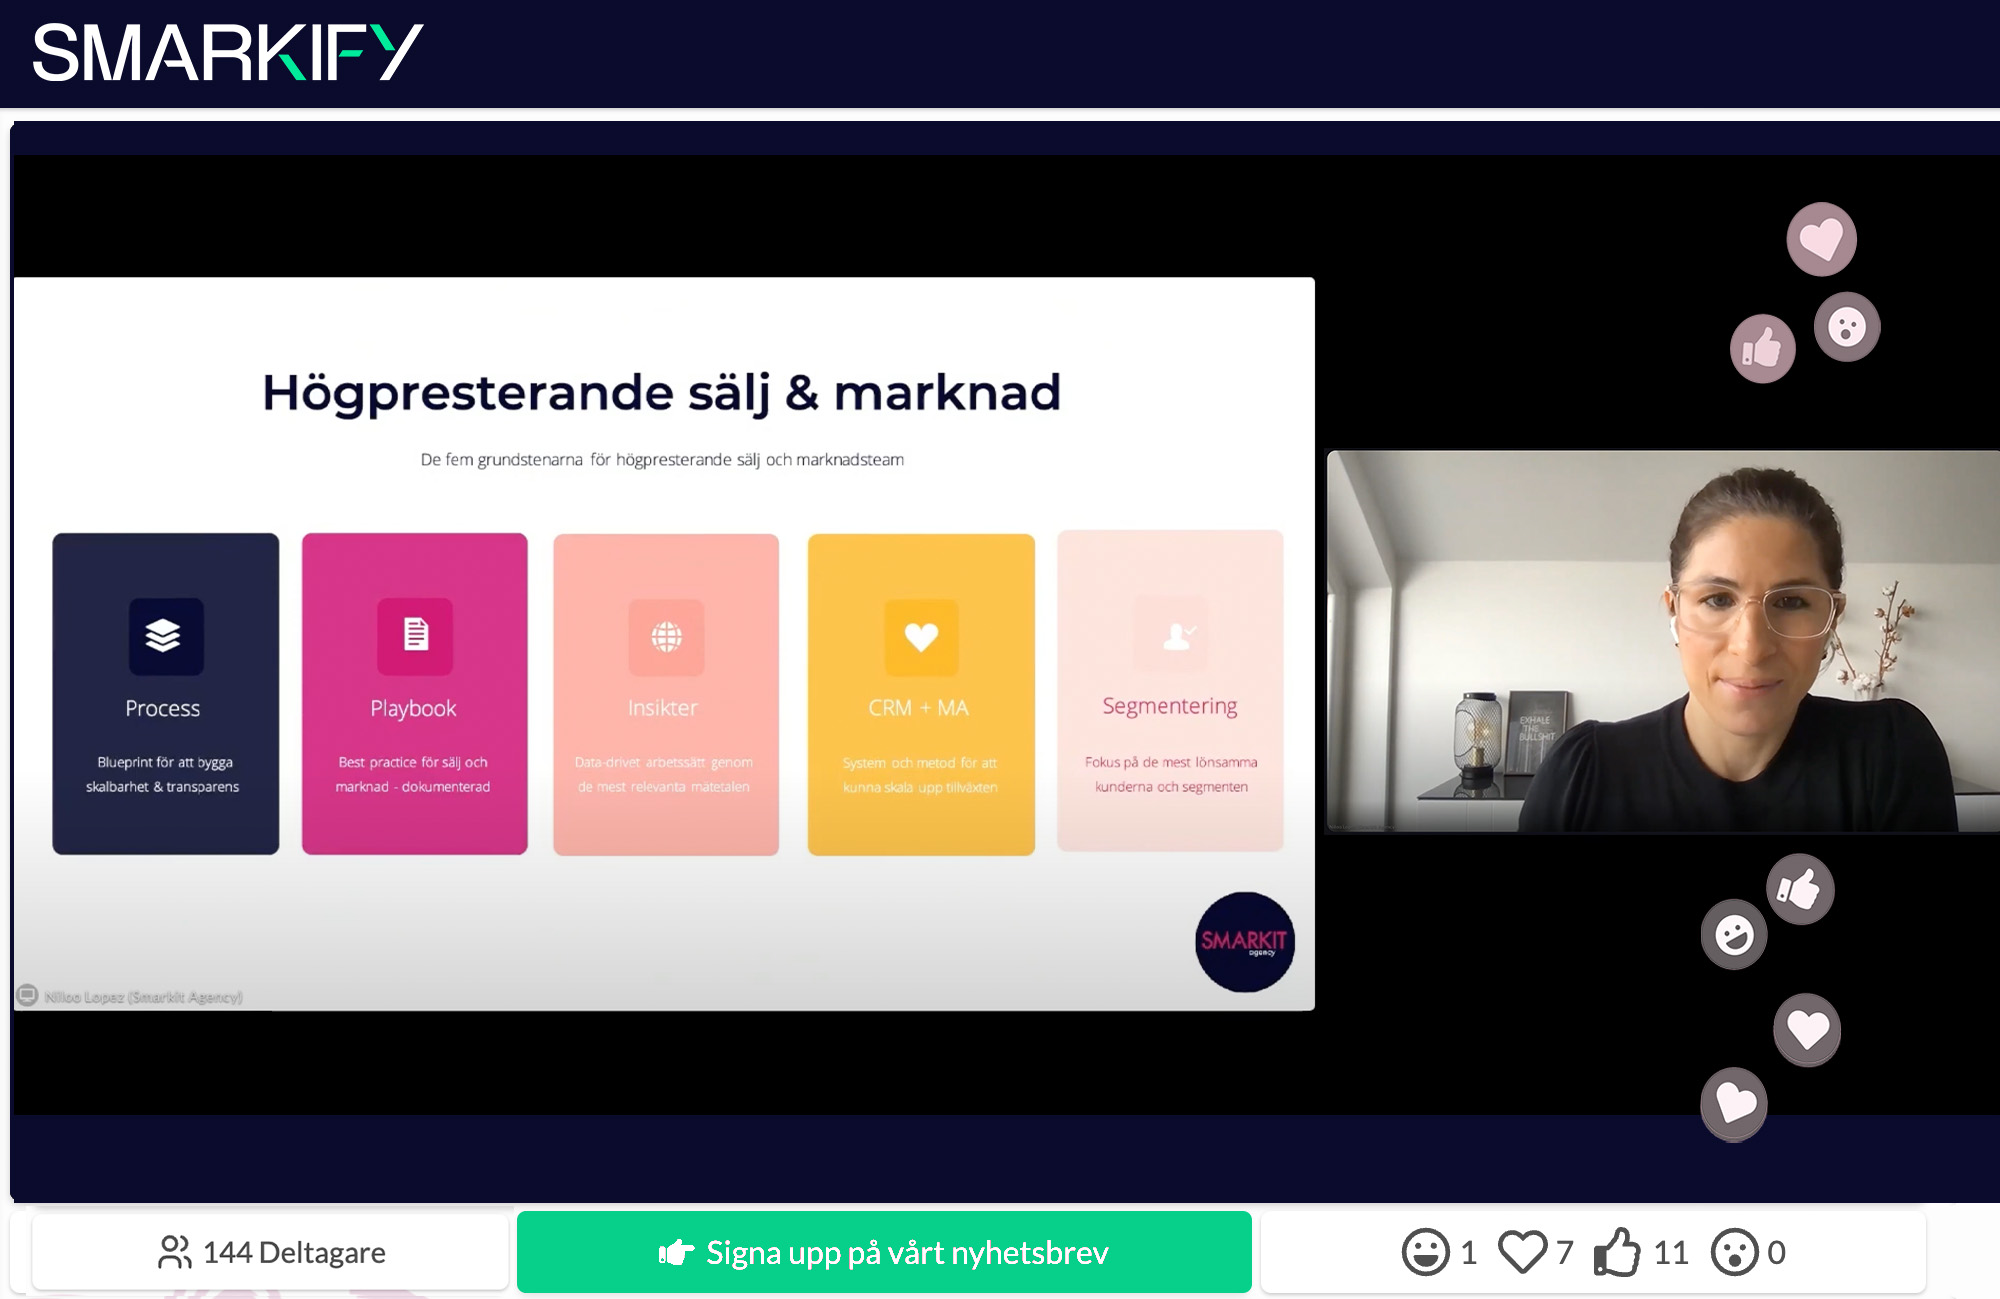 Smarkify is an agency that gives you everything you need to take your digital marketing to the next level! With their team of experts, Smarkify helps companies across several industries through advice, strategy and operational support in marketing, communication, digital sales and brand building.